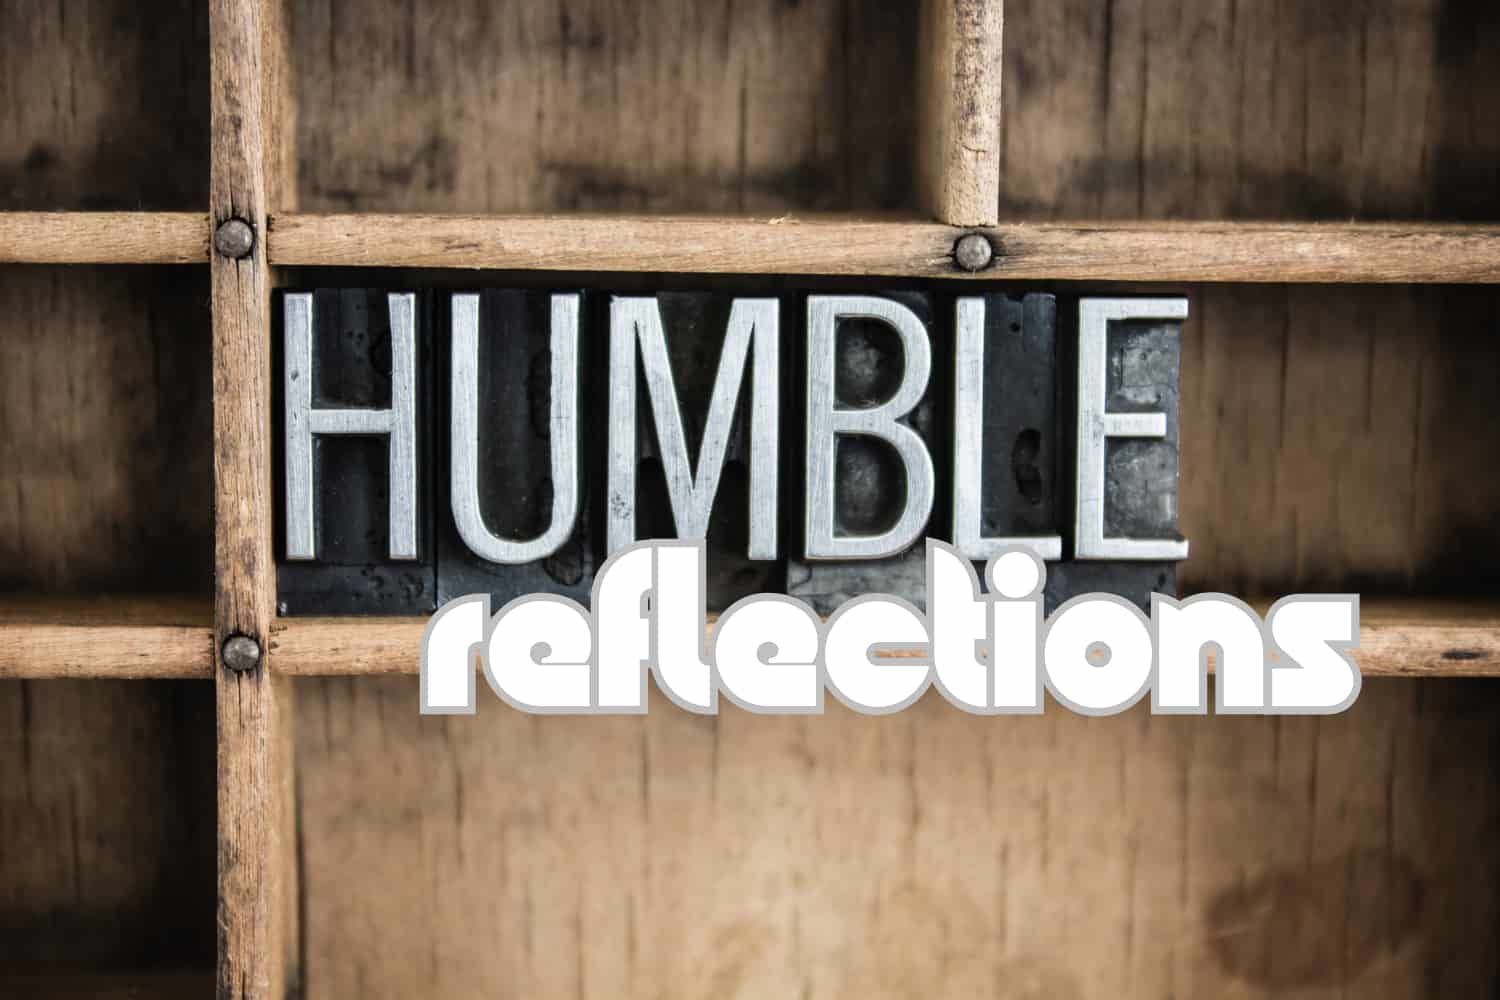 Object%20lesson%20-%20NT%20The%20pharisee%20and%20the%20tax%20collector%20-%20Humble%20reflections-5792de36 Jesus - His teaching